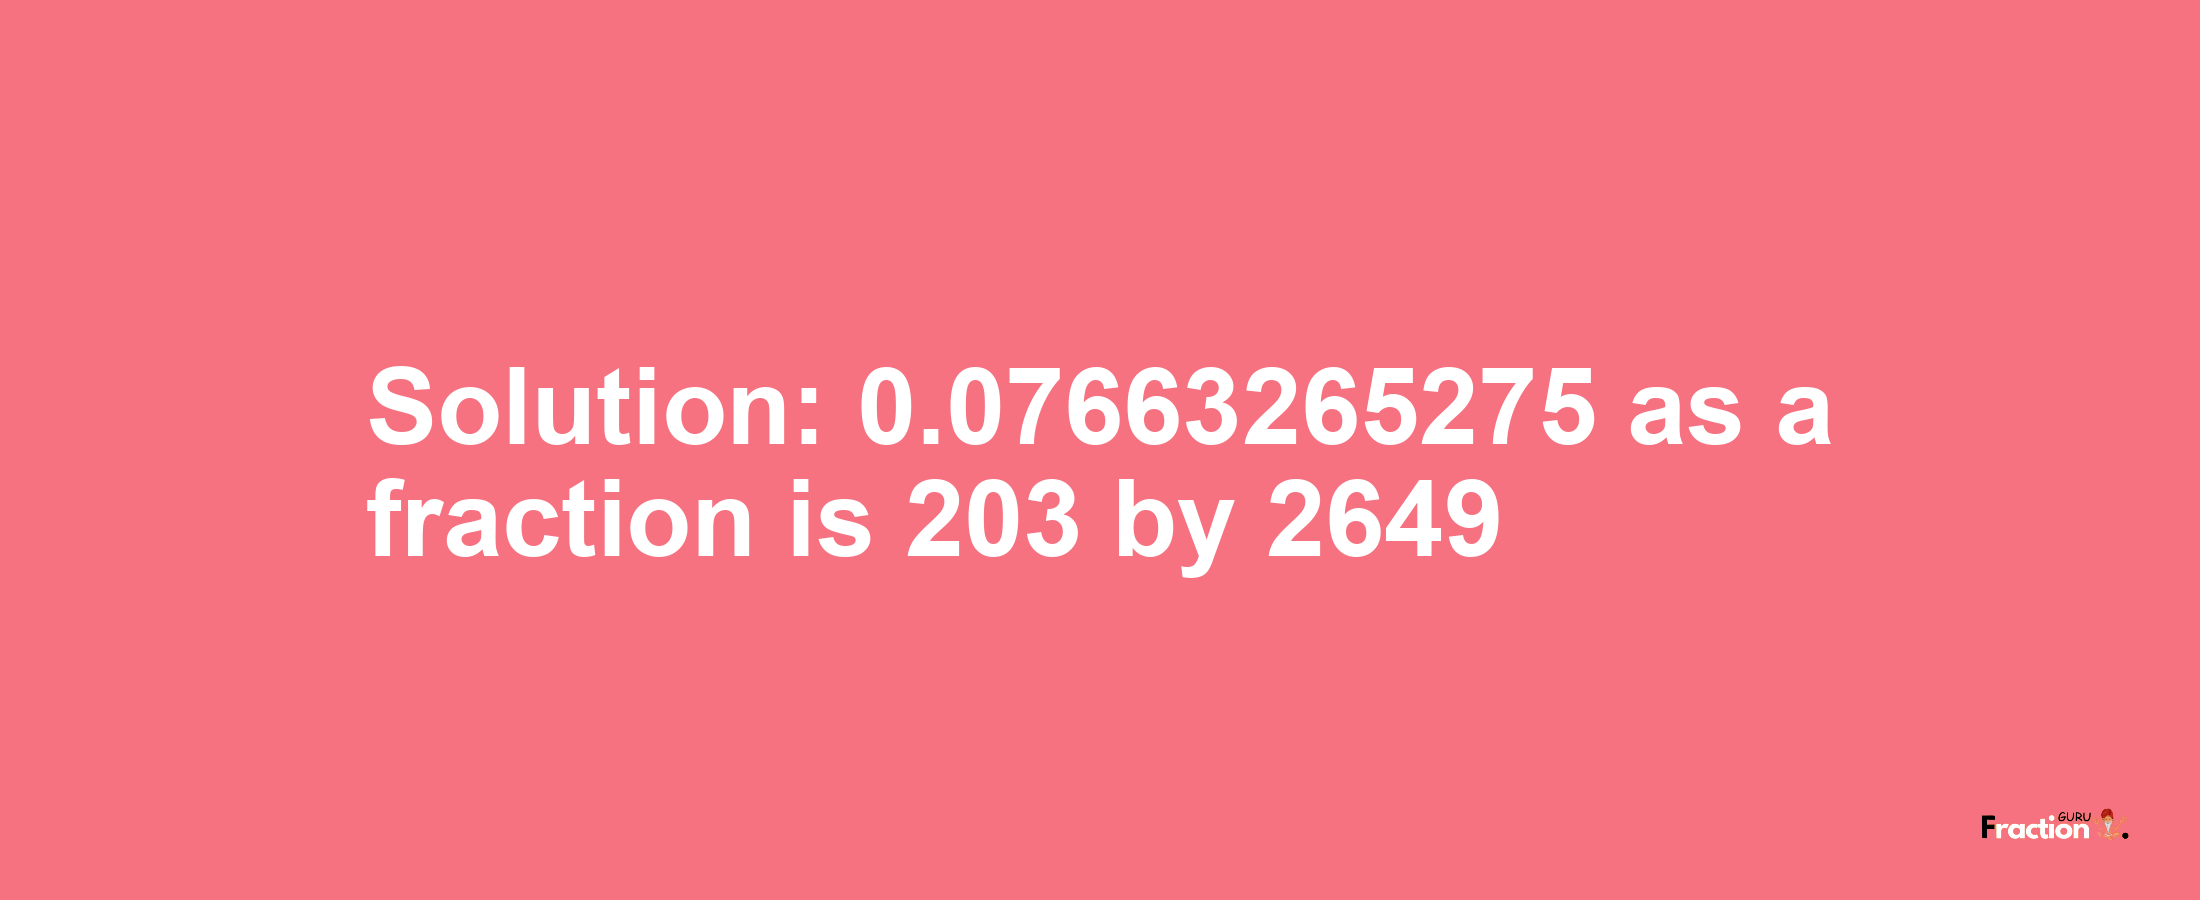 Solution:0.07663265275 as a fraction is 203/2649